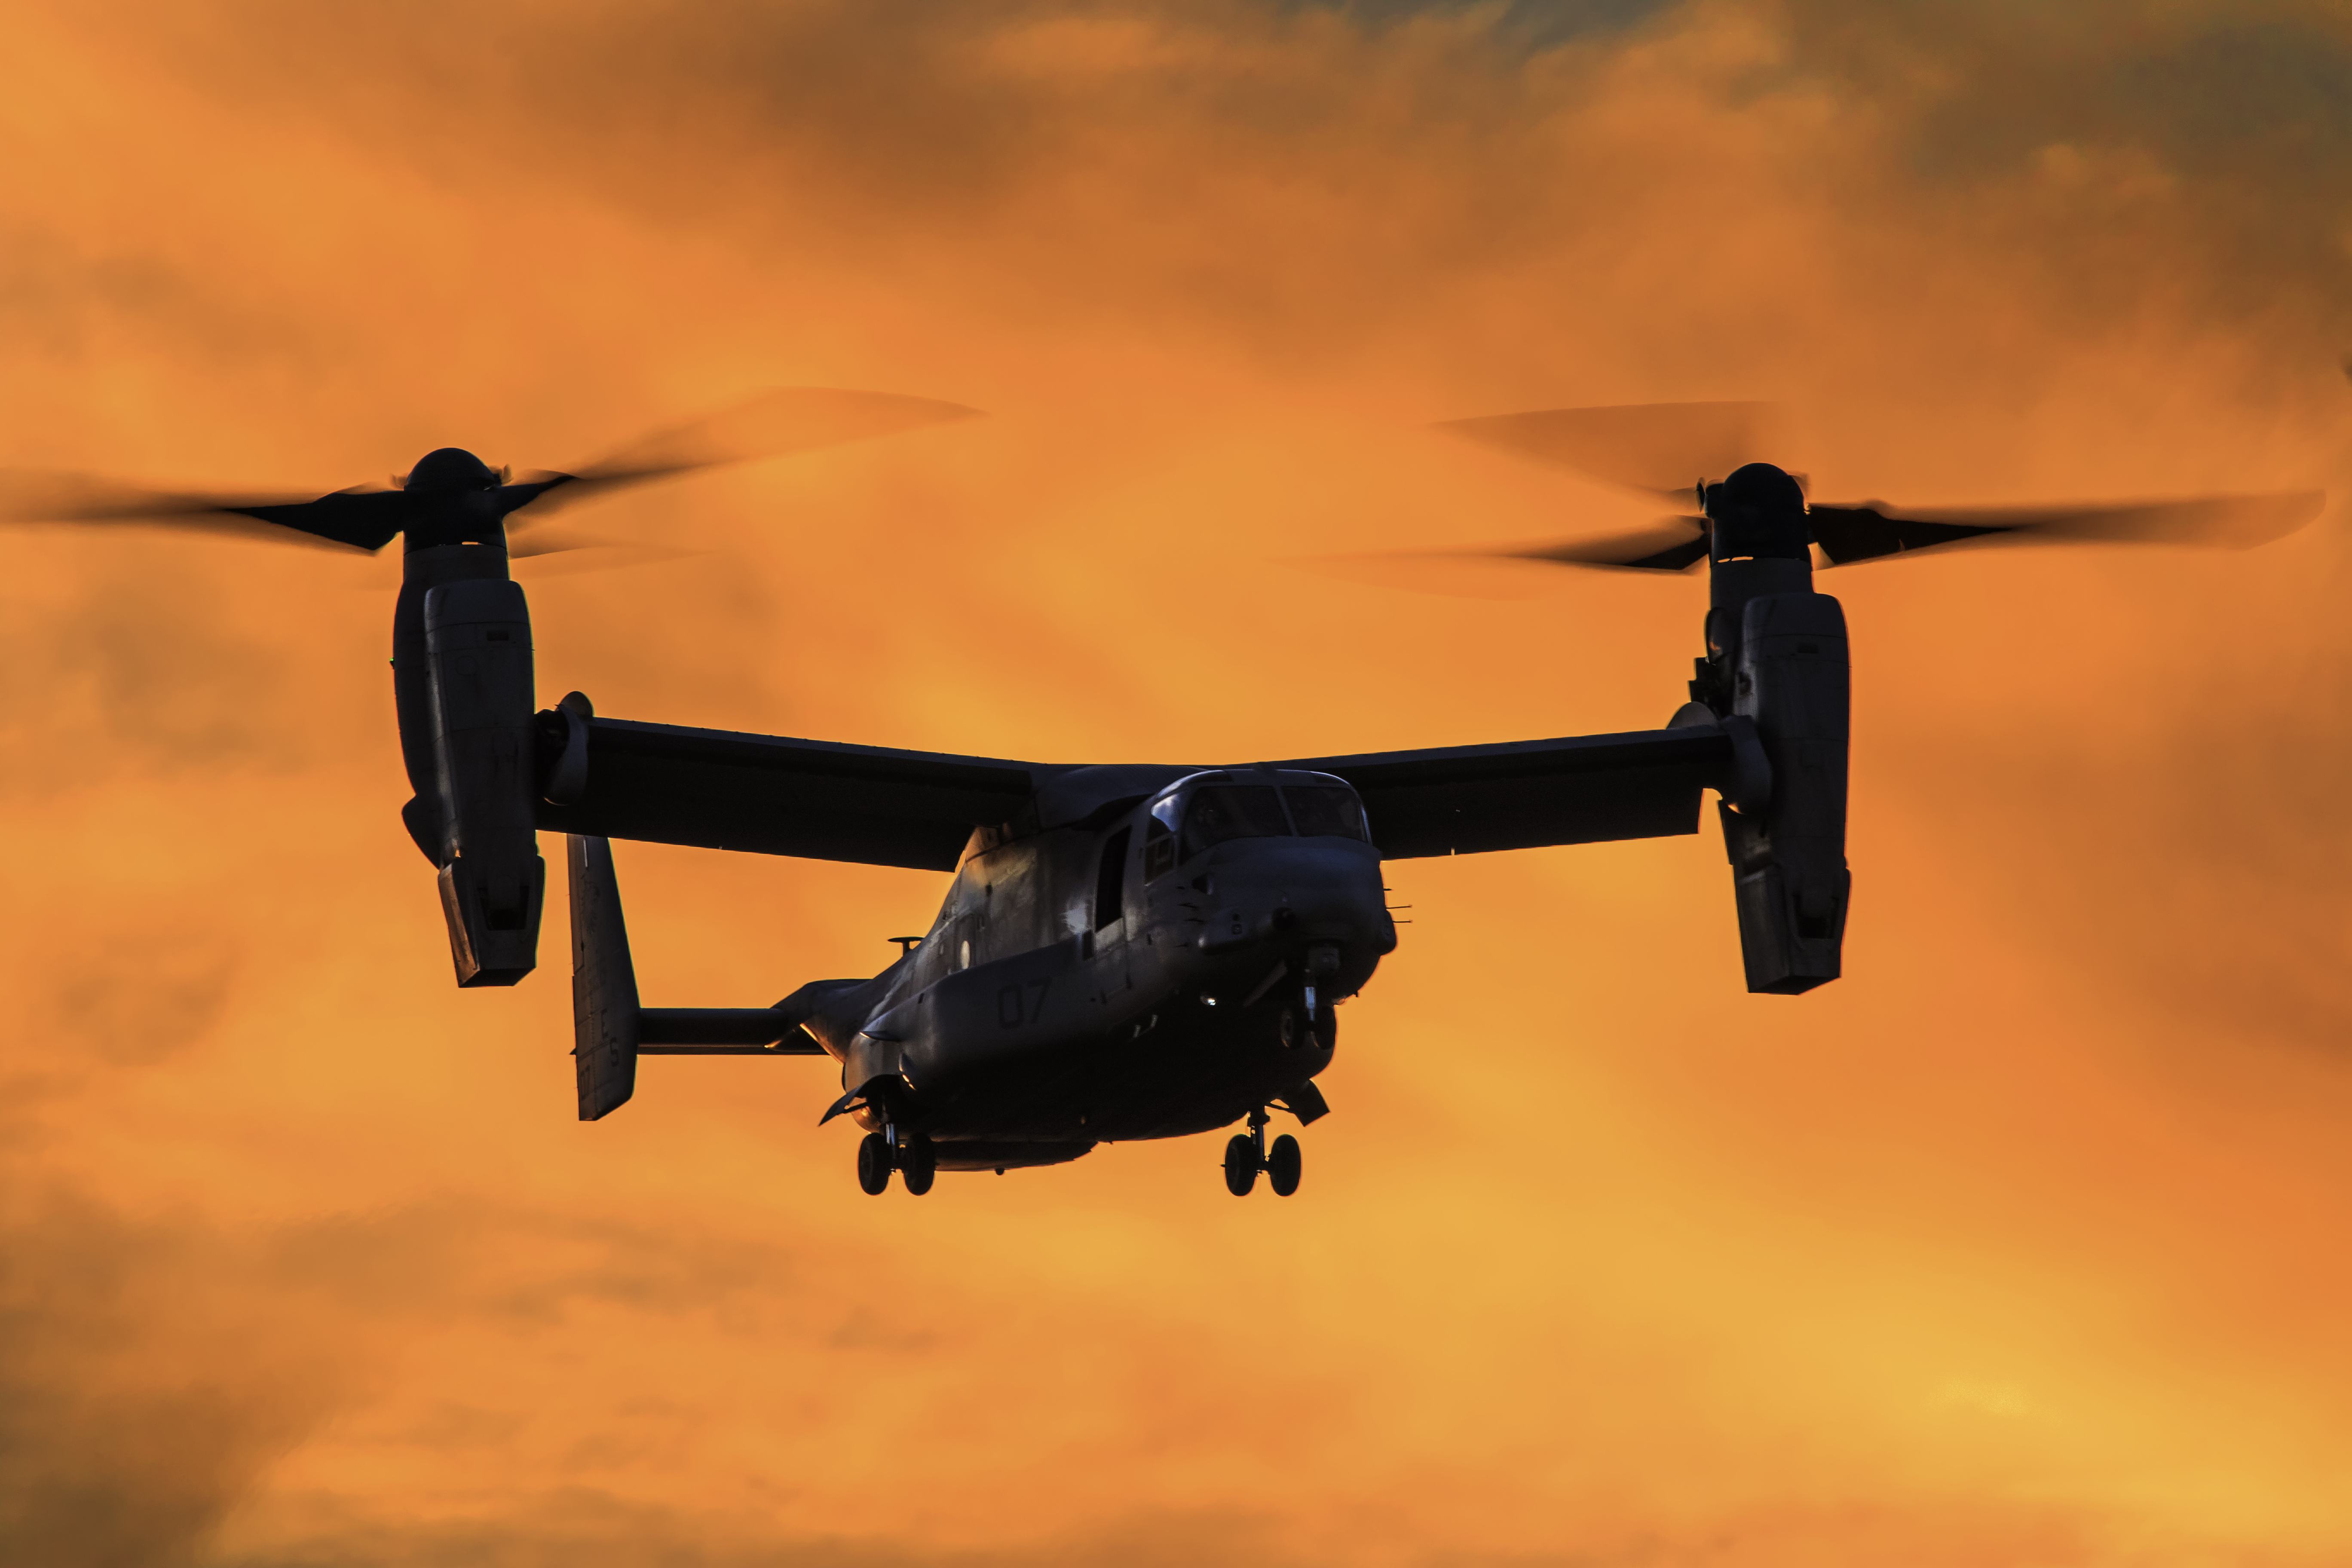 military, bell boeing v 22 osprey, aircraft, warplane, military helicopters